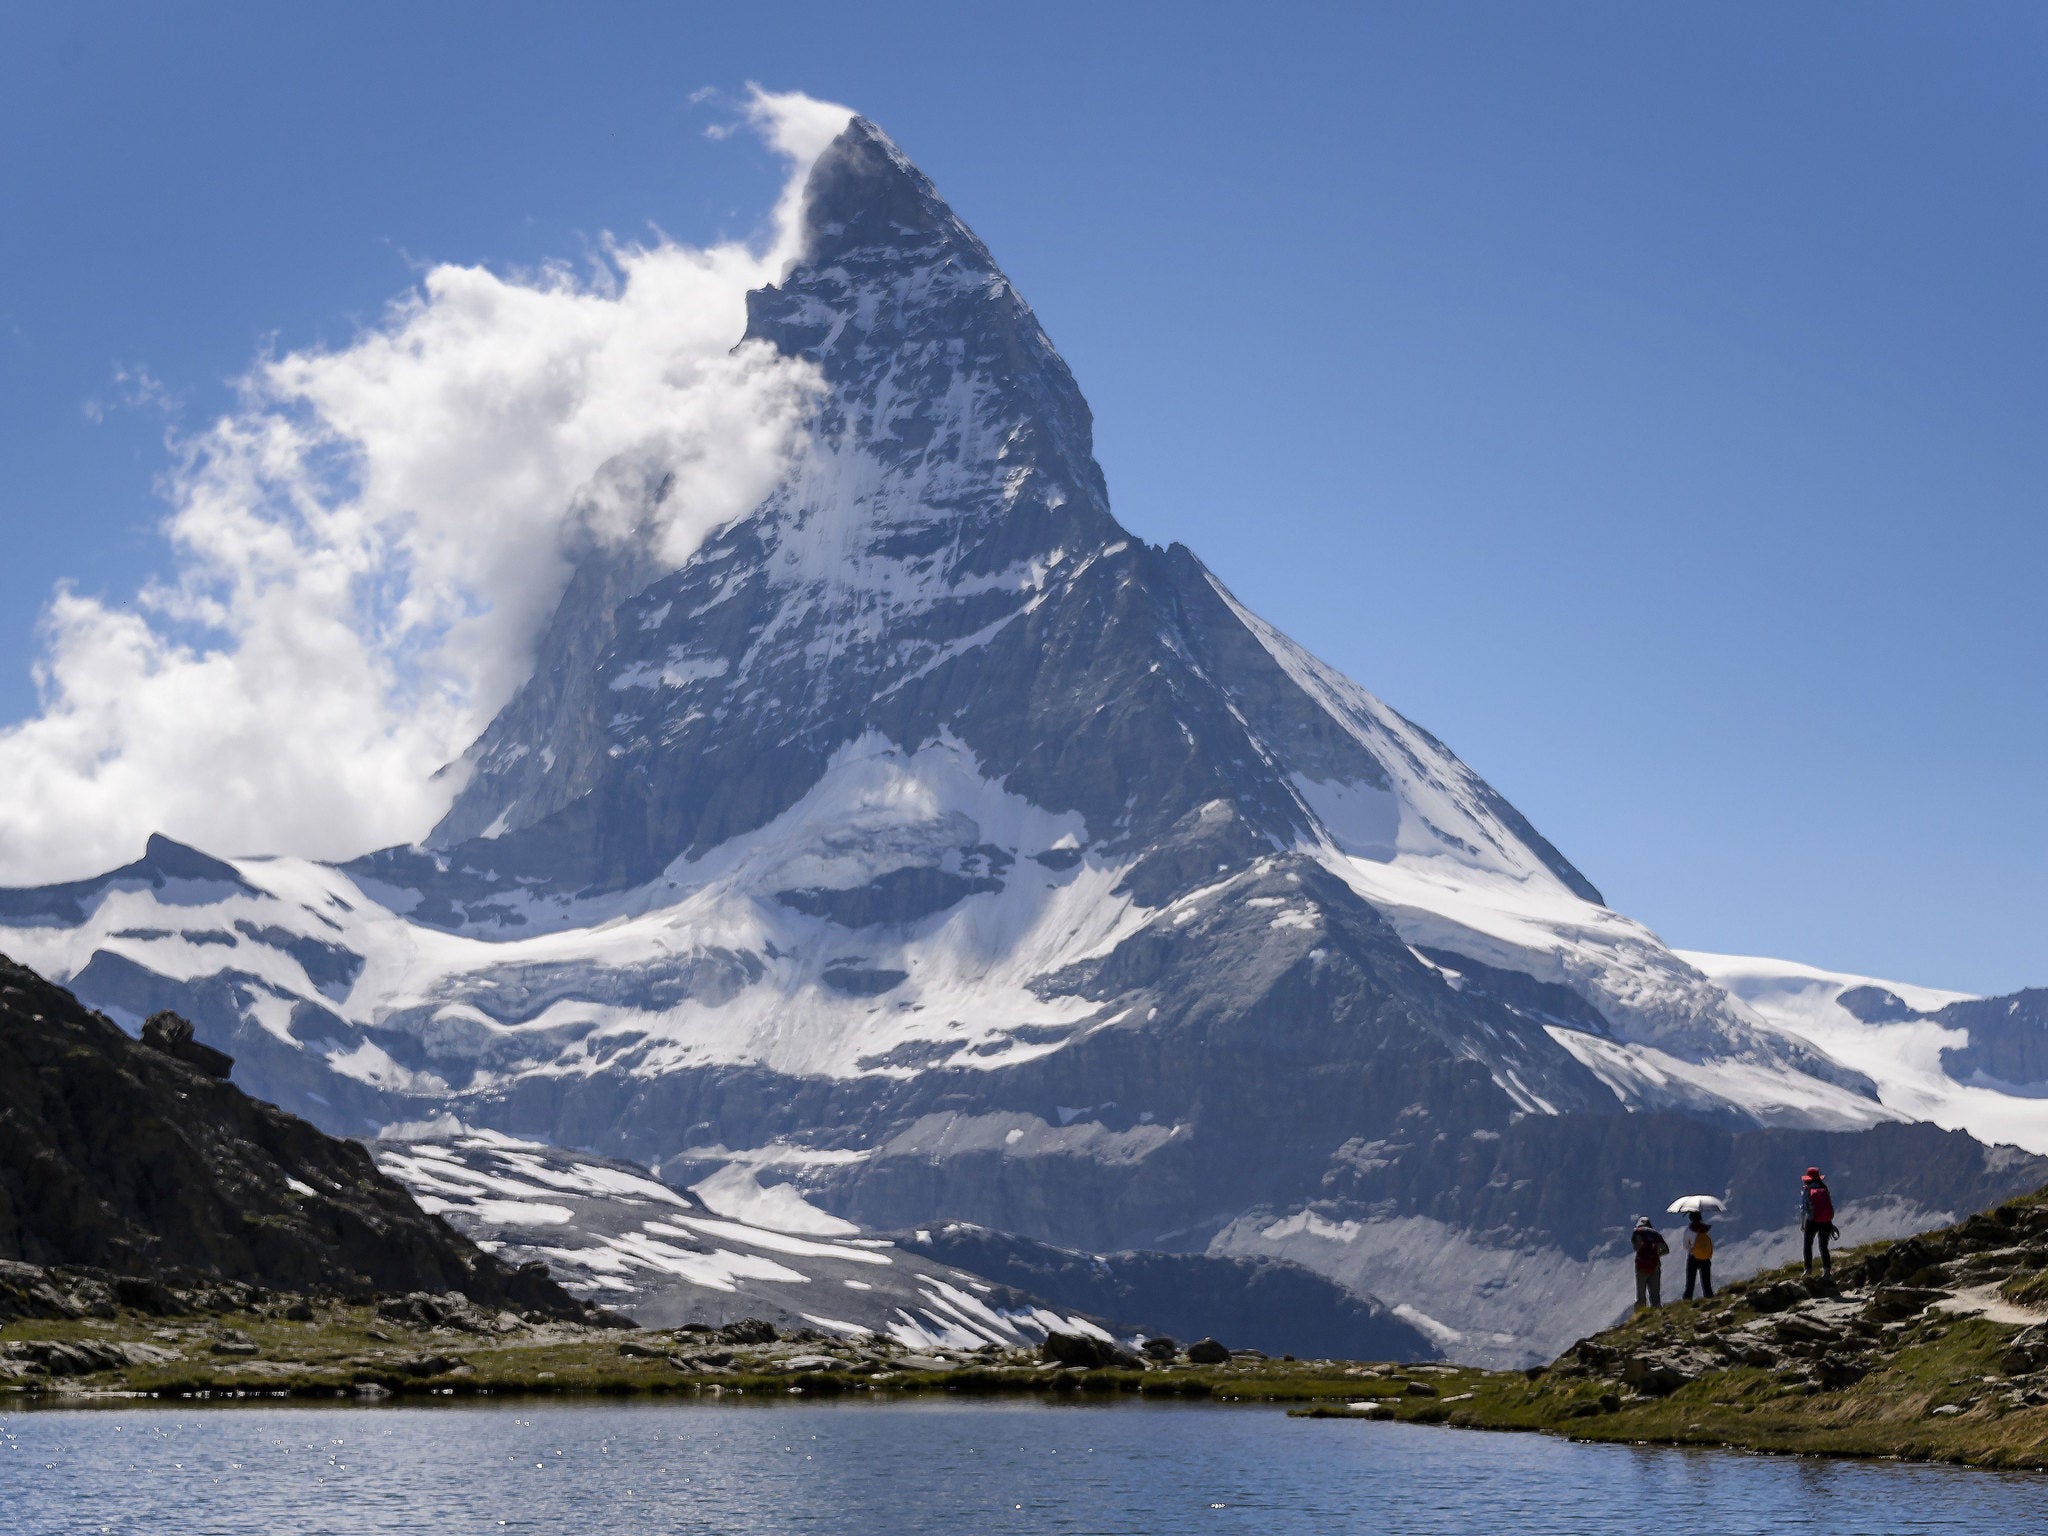 Both climbers were reported missing on 18 August 1970 when they were caught in a snowstorm while heading to climb the north face of the Matterhorn